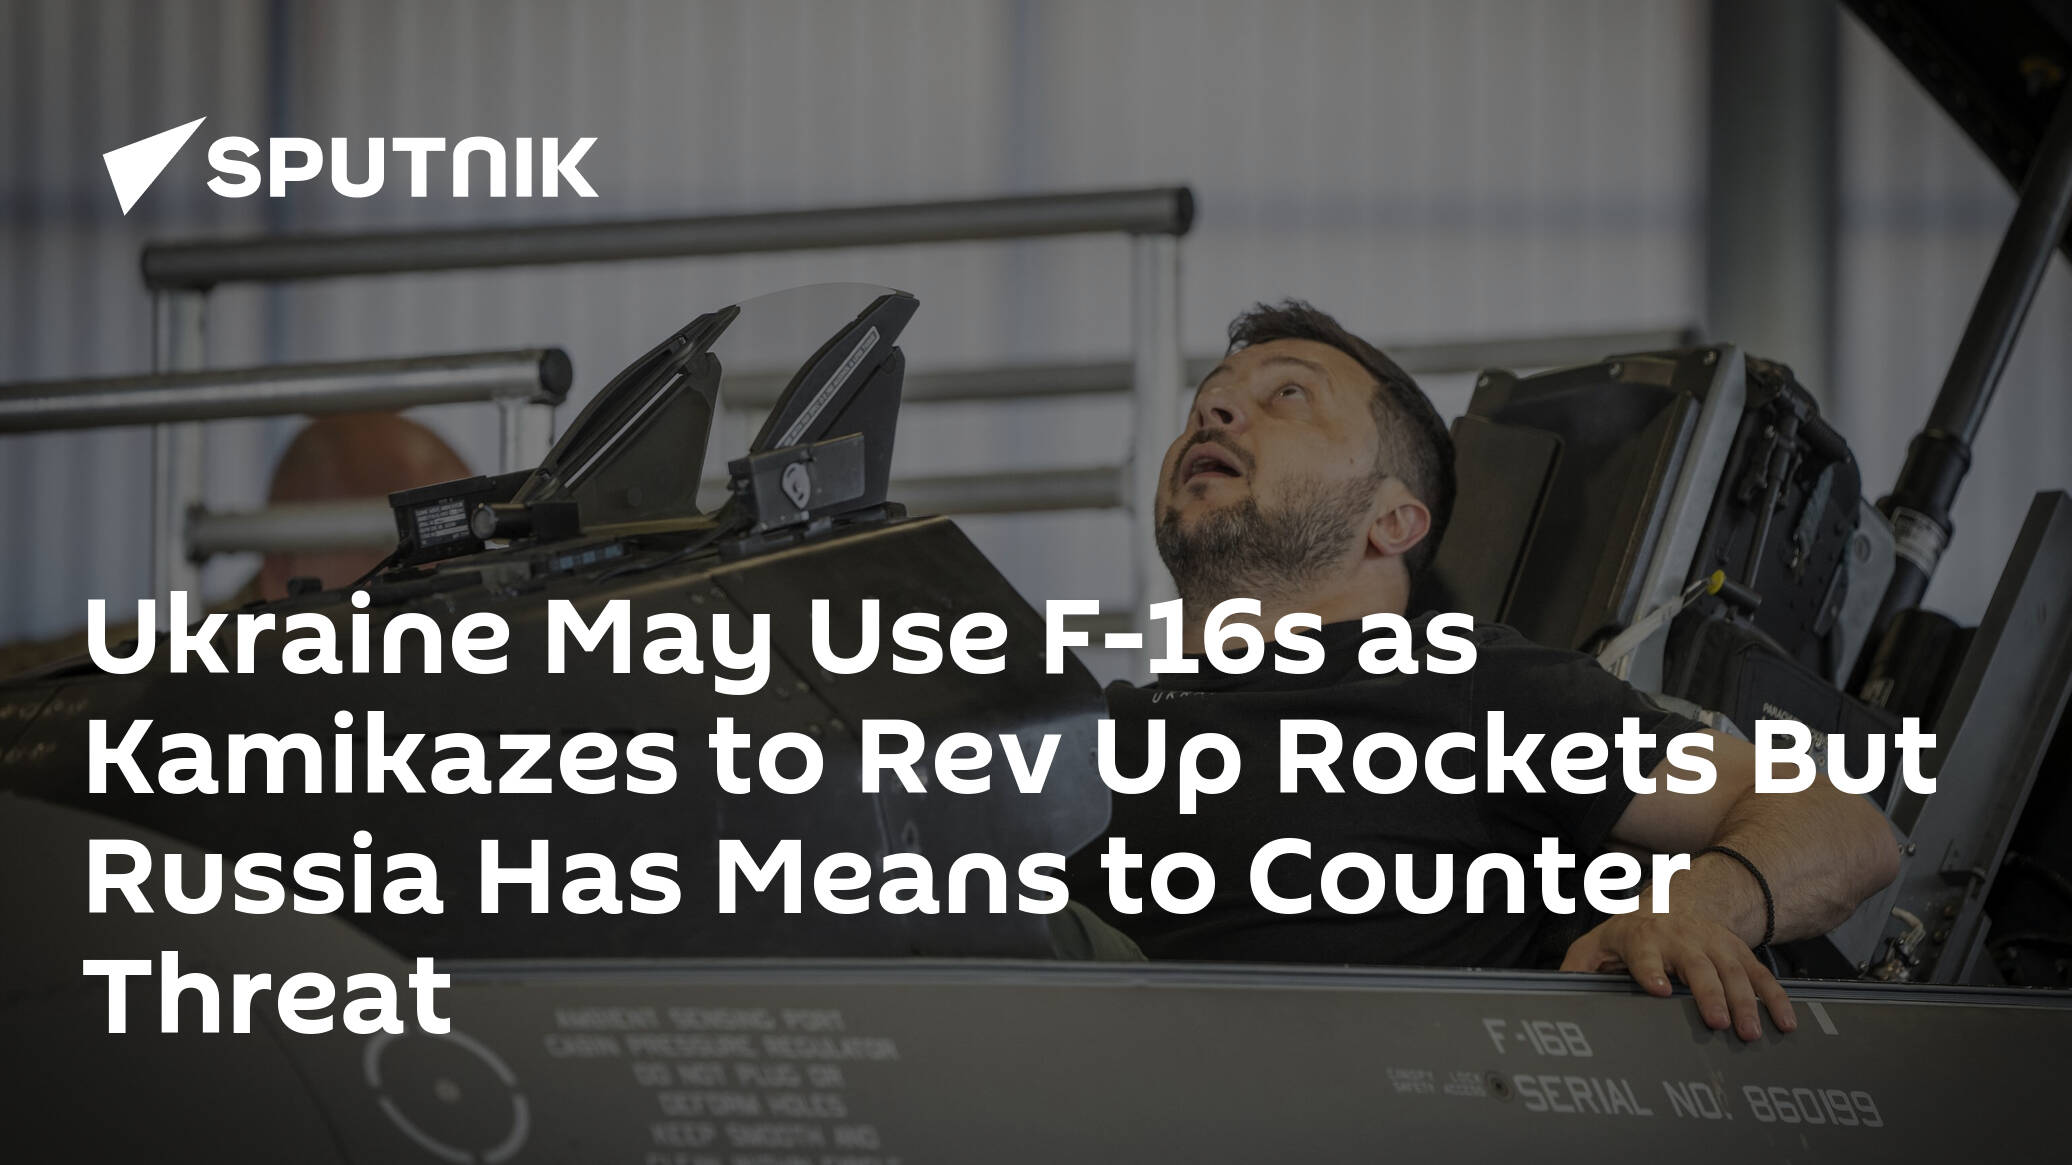 Ukraine May Use F-16s as Kamikazes to Rev Up Rockets But Russia Has Means to Counter Threat